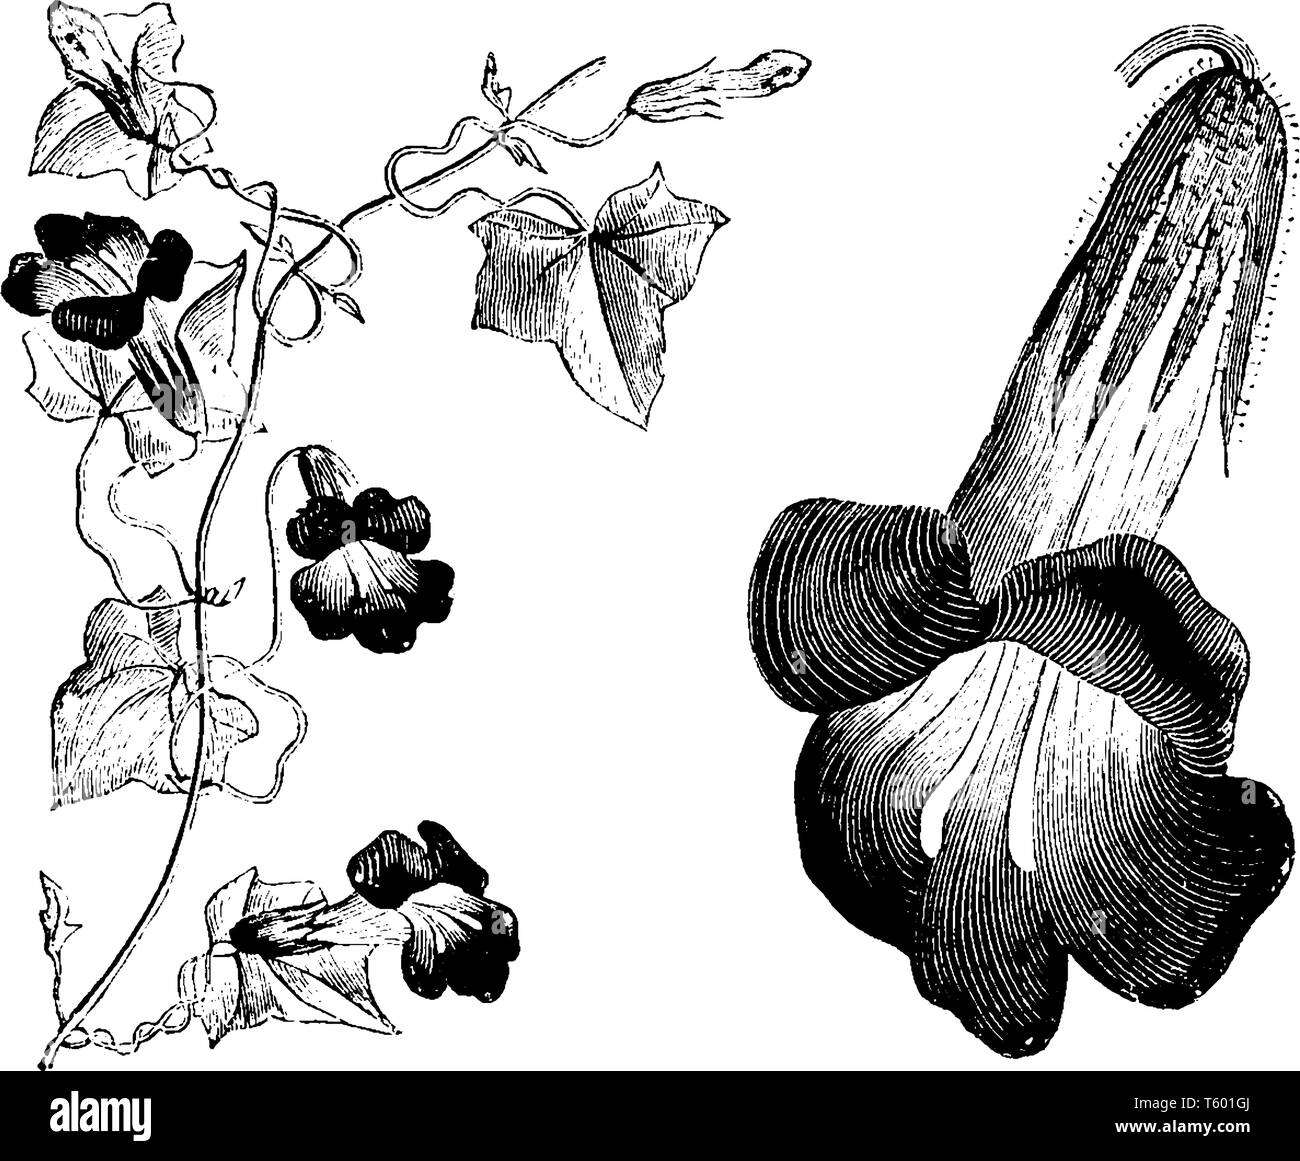 The flowering plant of maurandya barclayana, also known as angels trumpet or Mexican viper. It is an ornamental plant in the Plantaginaceae family. It Stock Vector